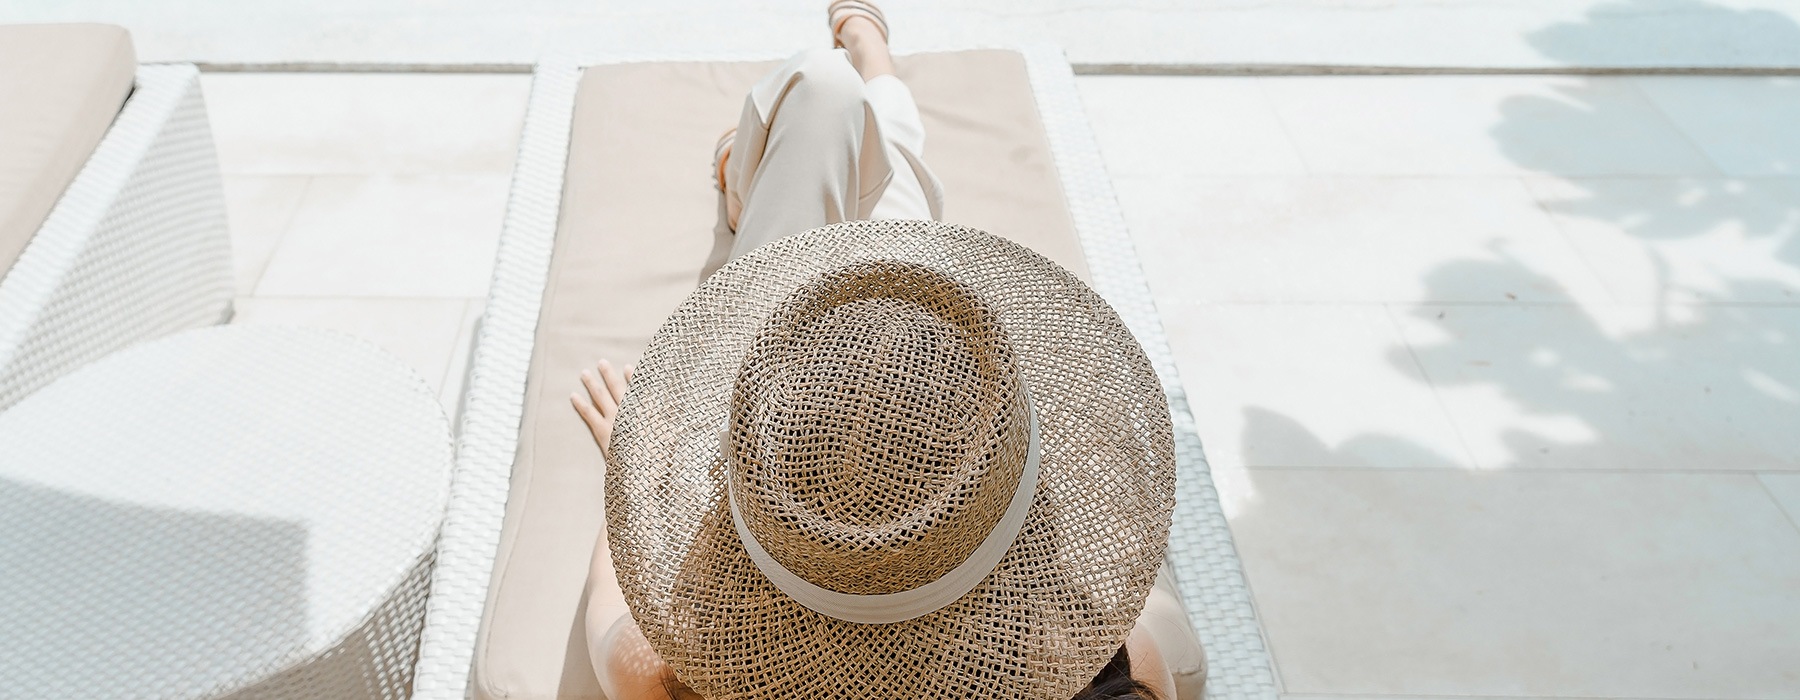 lifestyle image of a woman laying on a reclining chair beside the pool